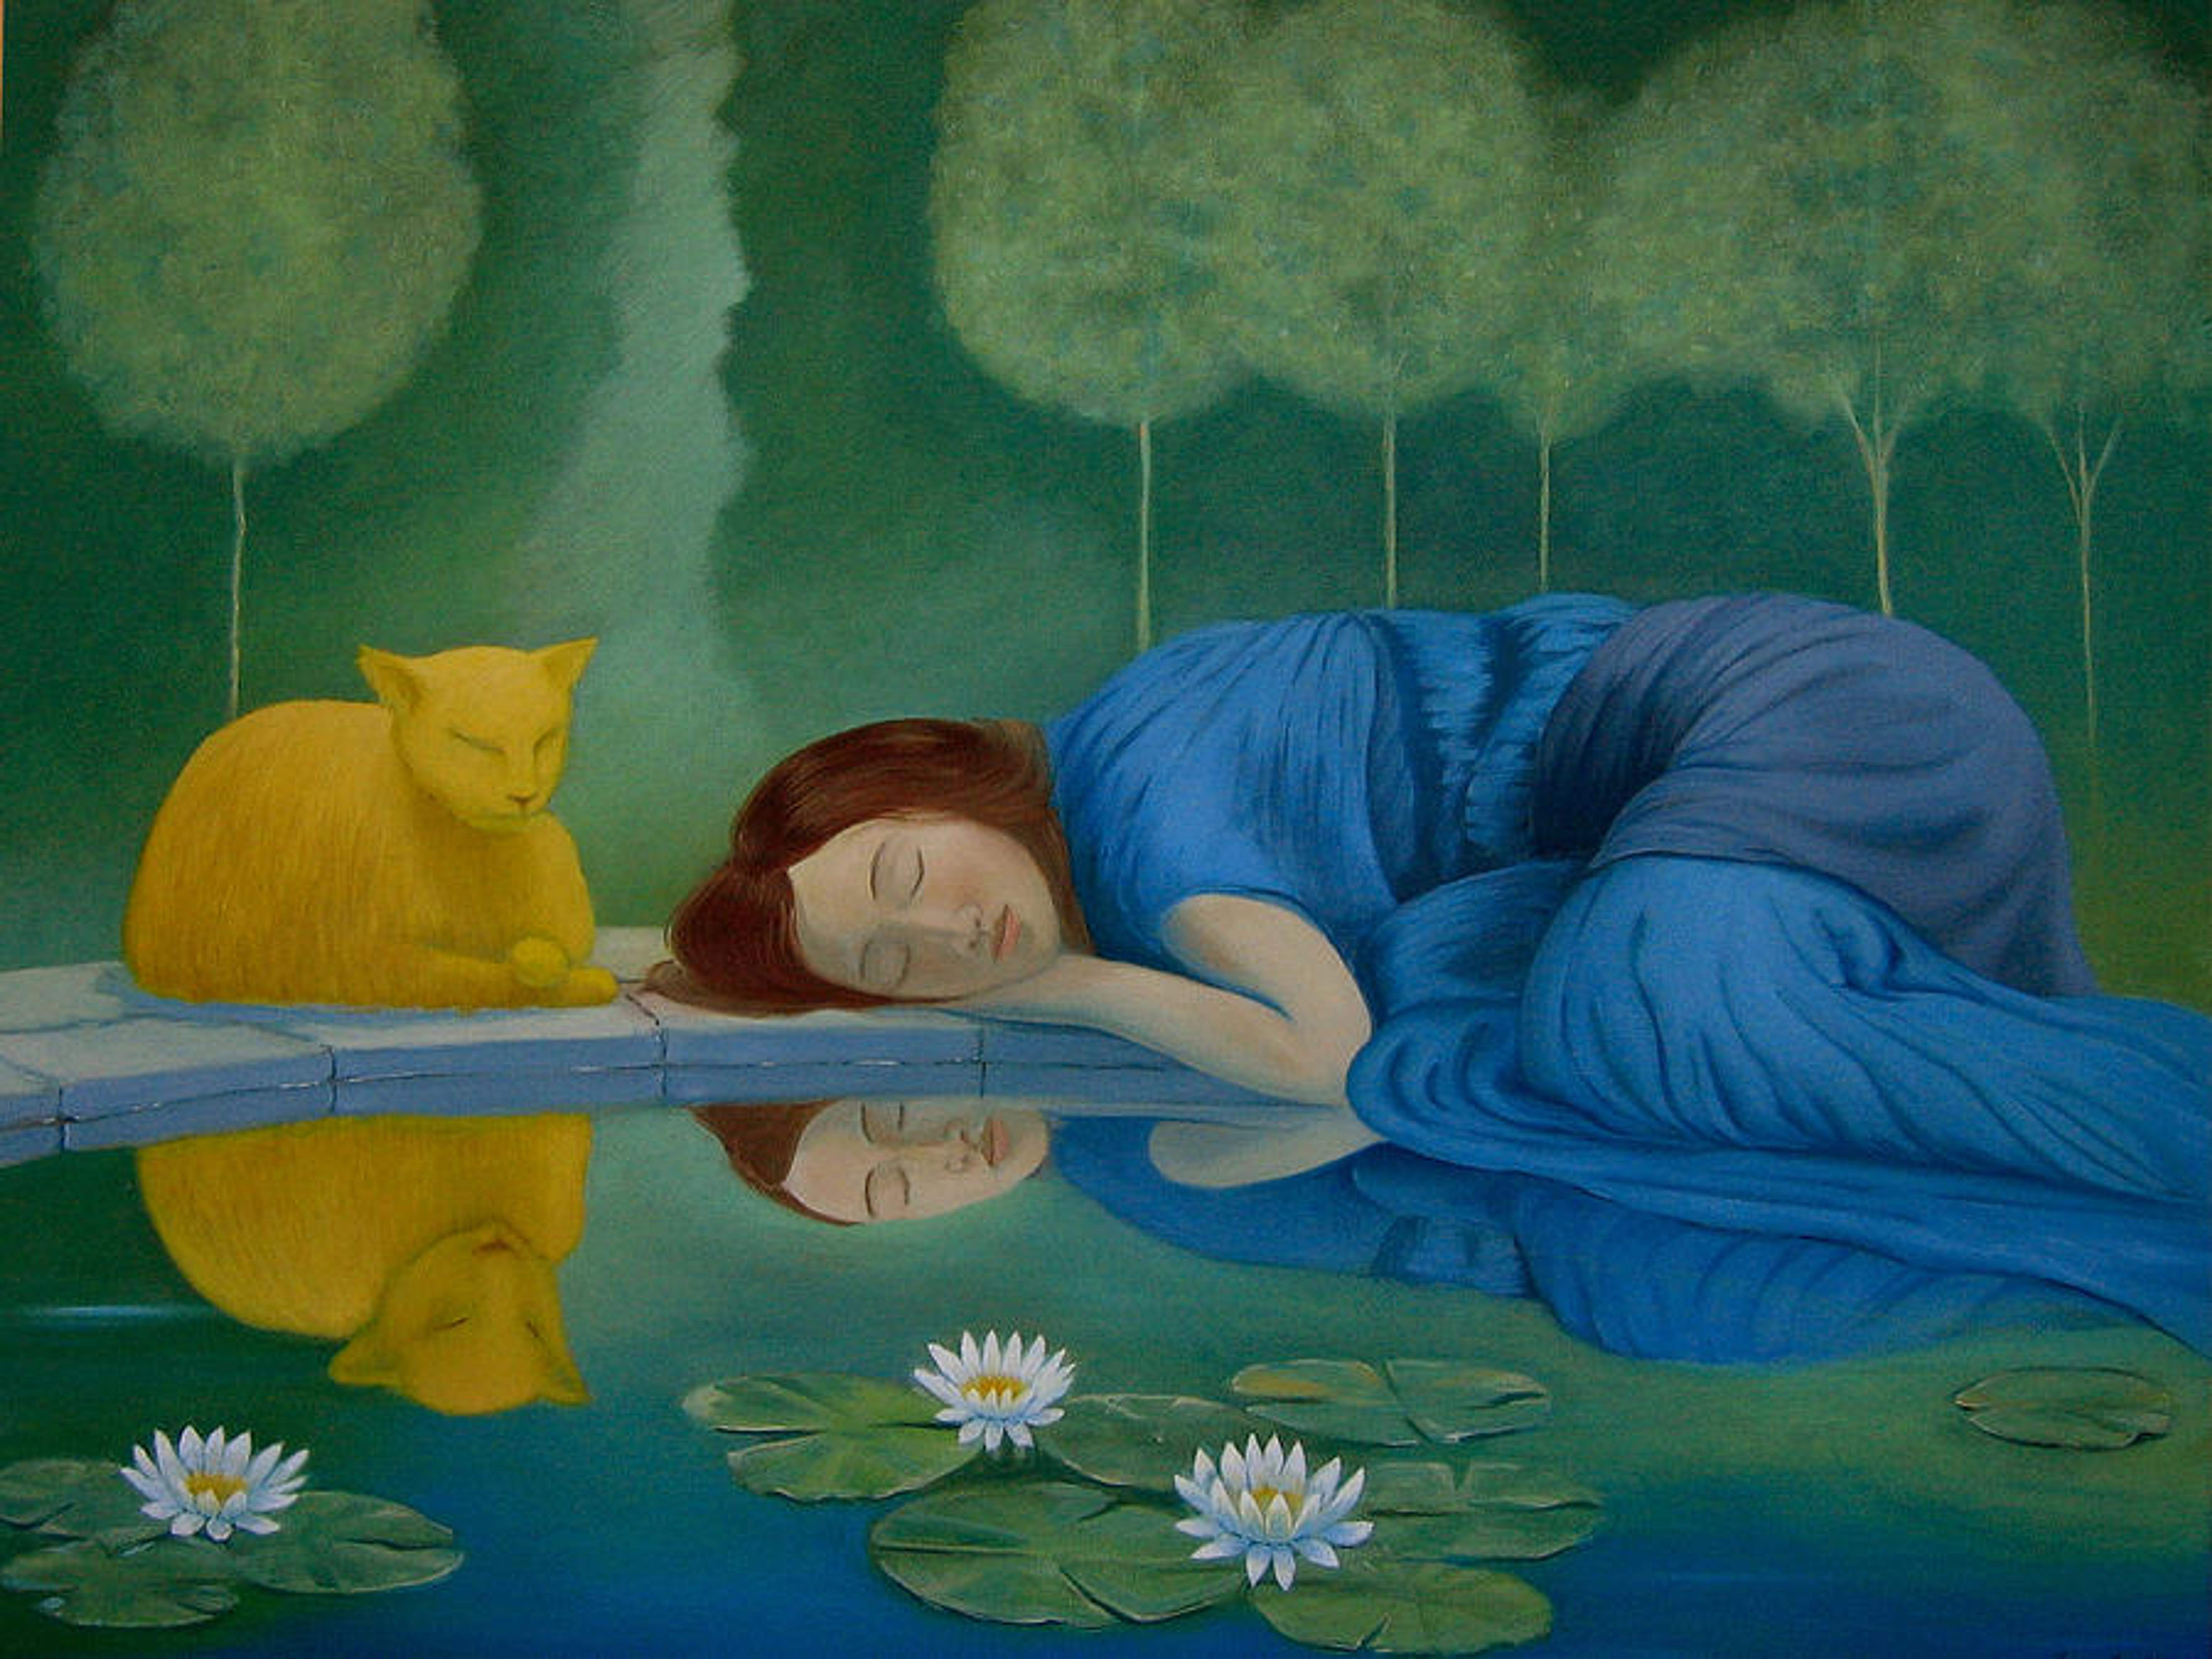 A painting of a woman and a cat sleeping peacefully near a pond with lily pads and flowers.